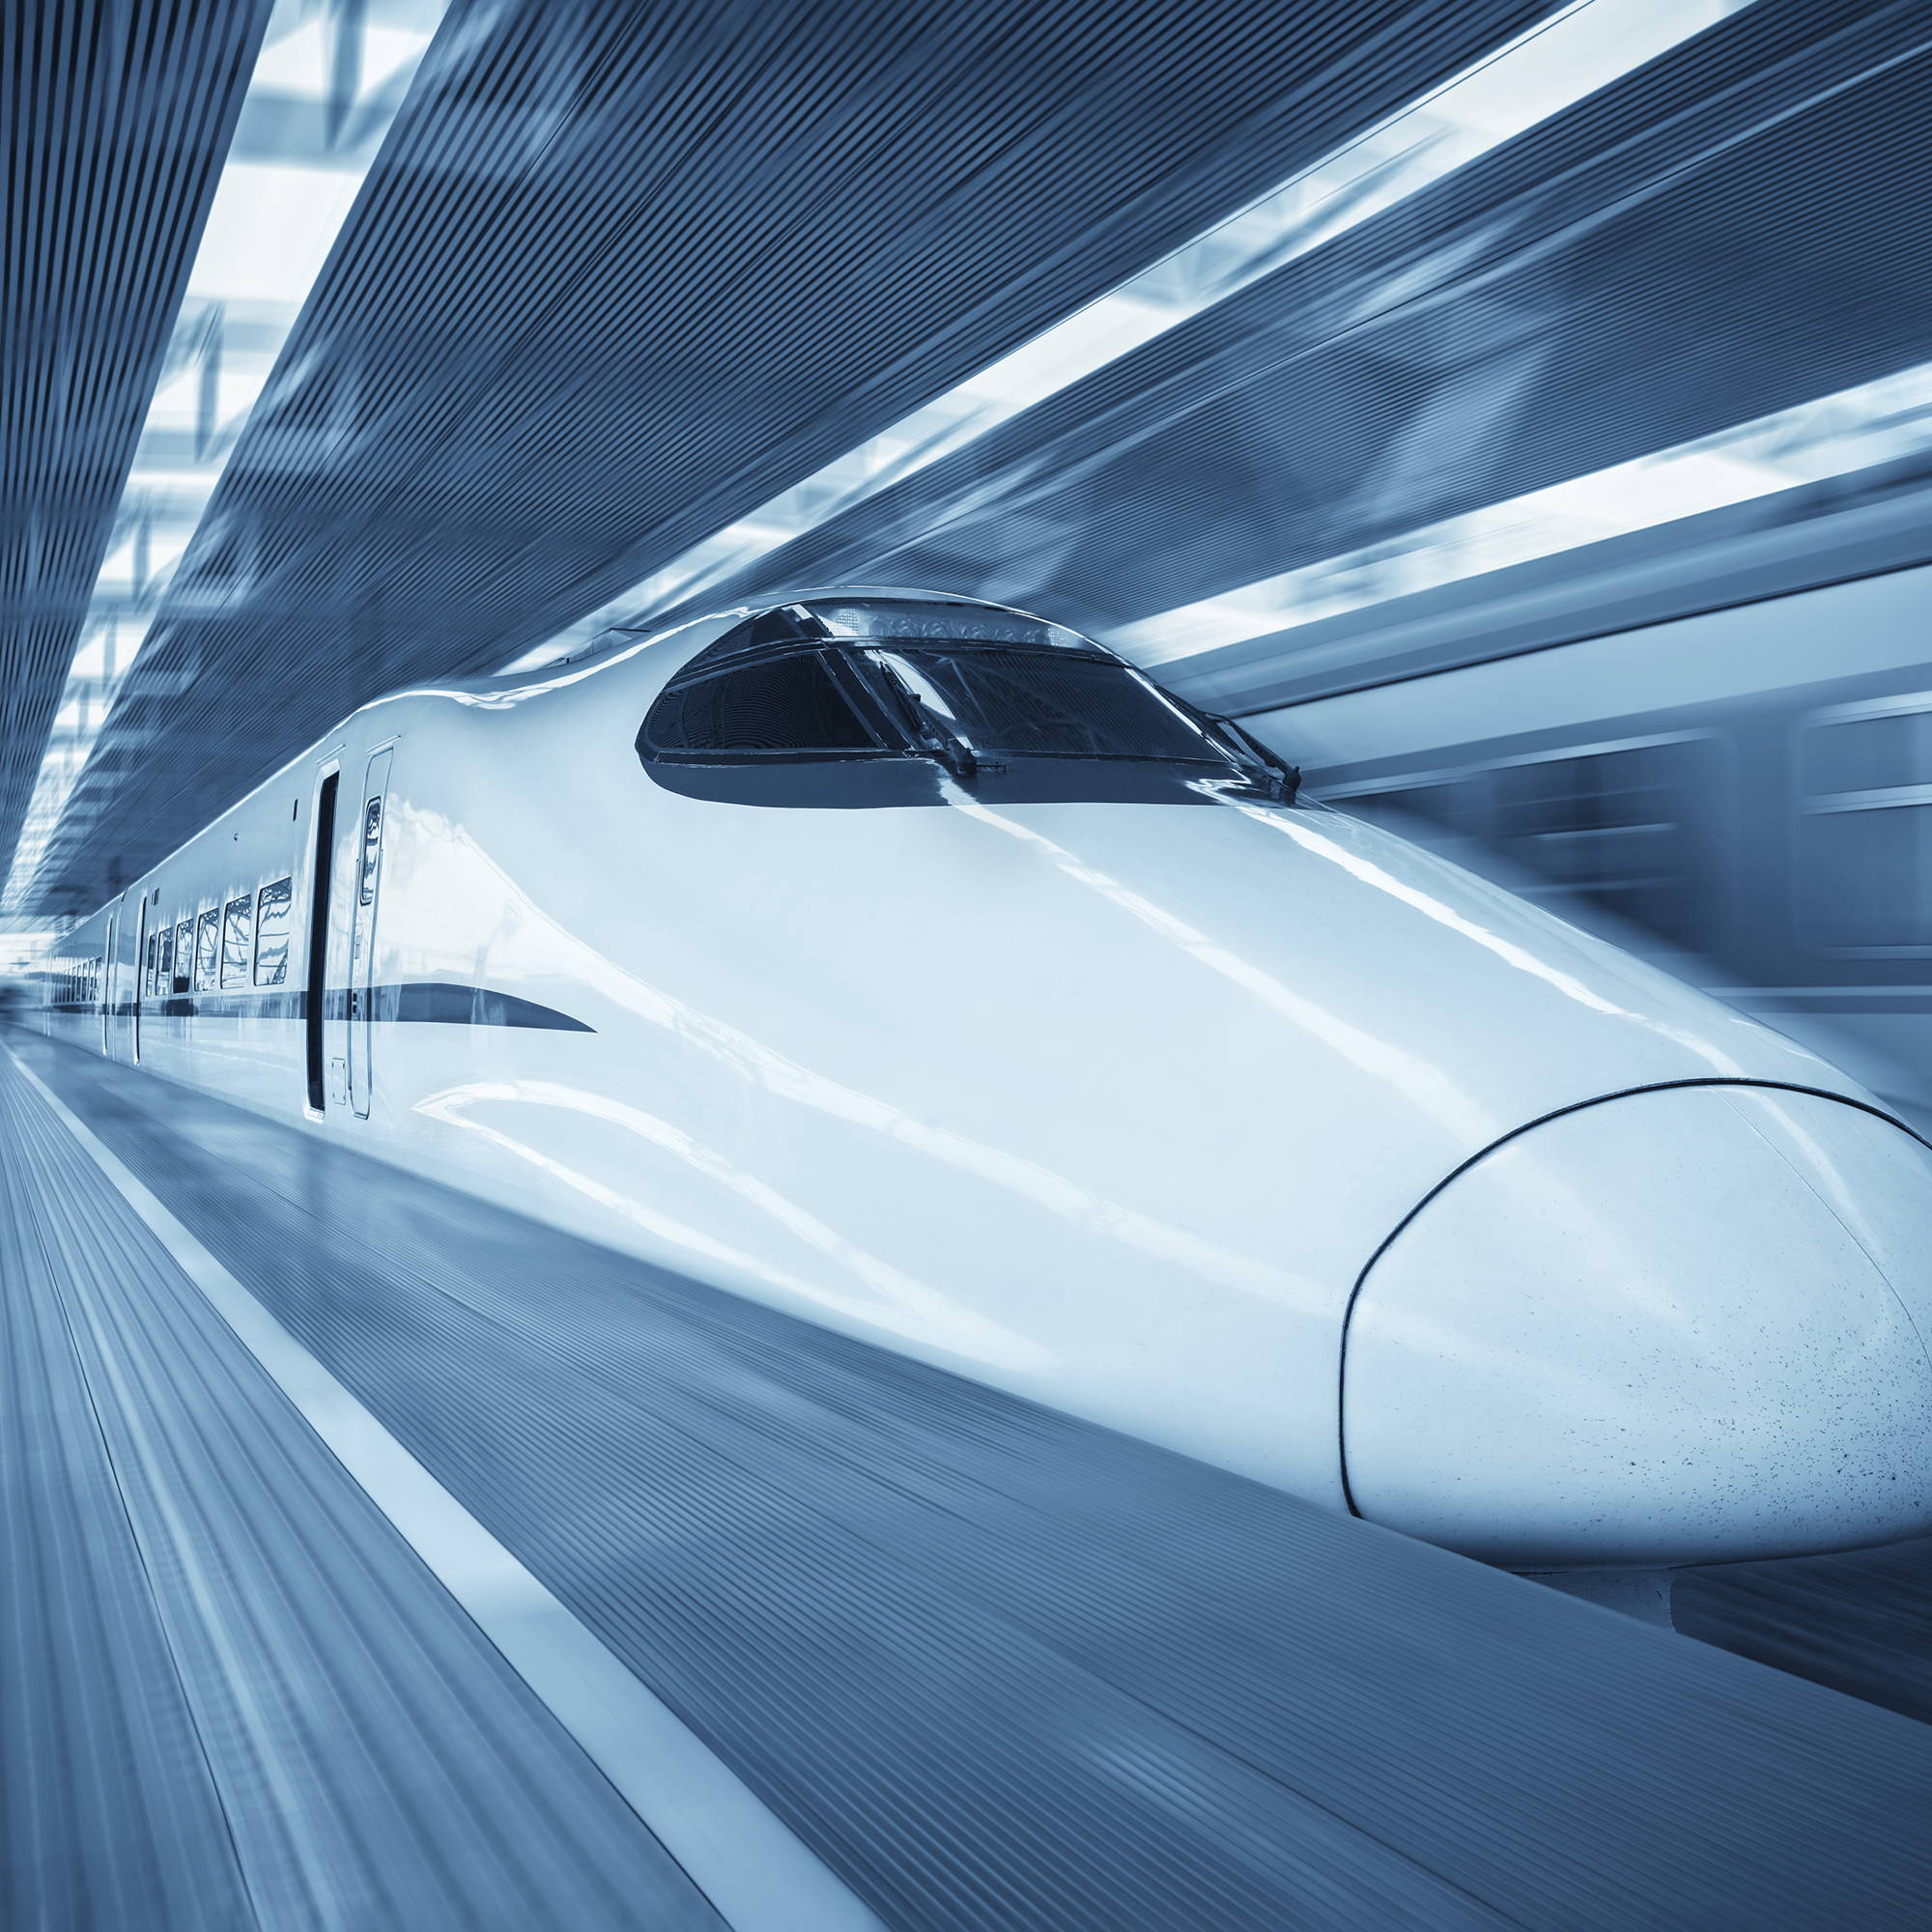 CUSTOM AND PROVEN SOLUTIONS TO THE RAIL INDUSTRY